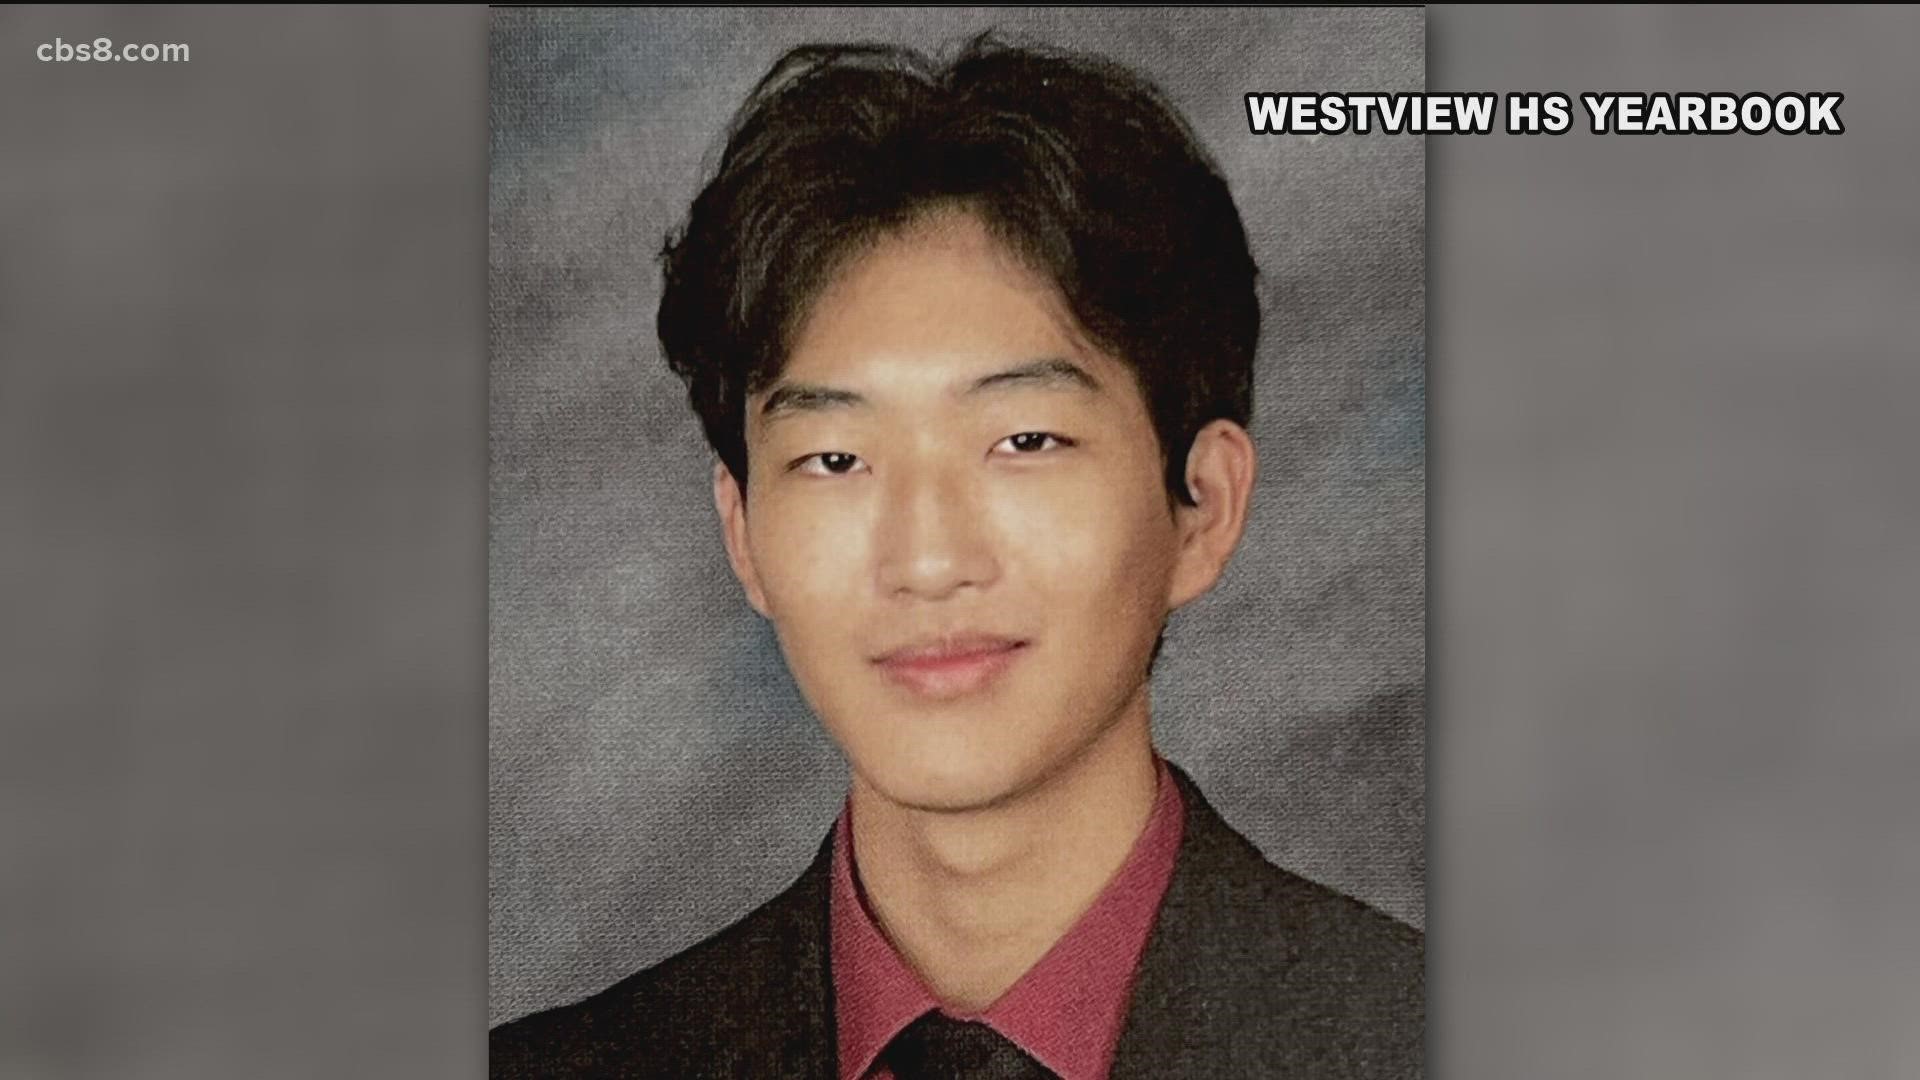 Aaron Fan, 18, was reportedly at a party on the eighth floor of Tioga Hall dorm before he entered a bathroom. Witnesses saw him fall out of the bathroom window.